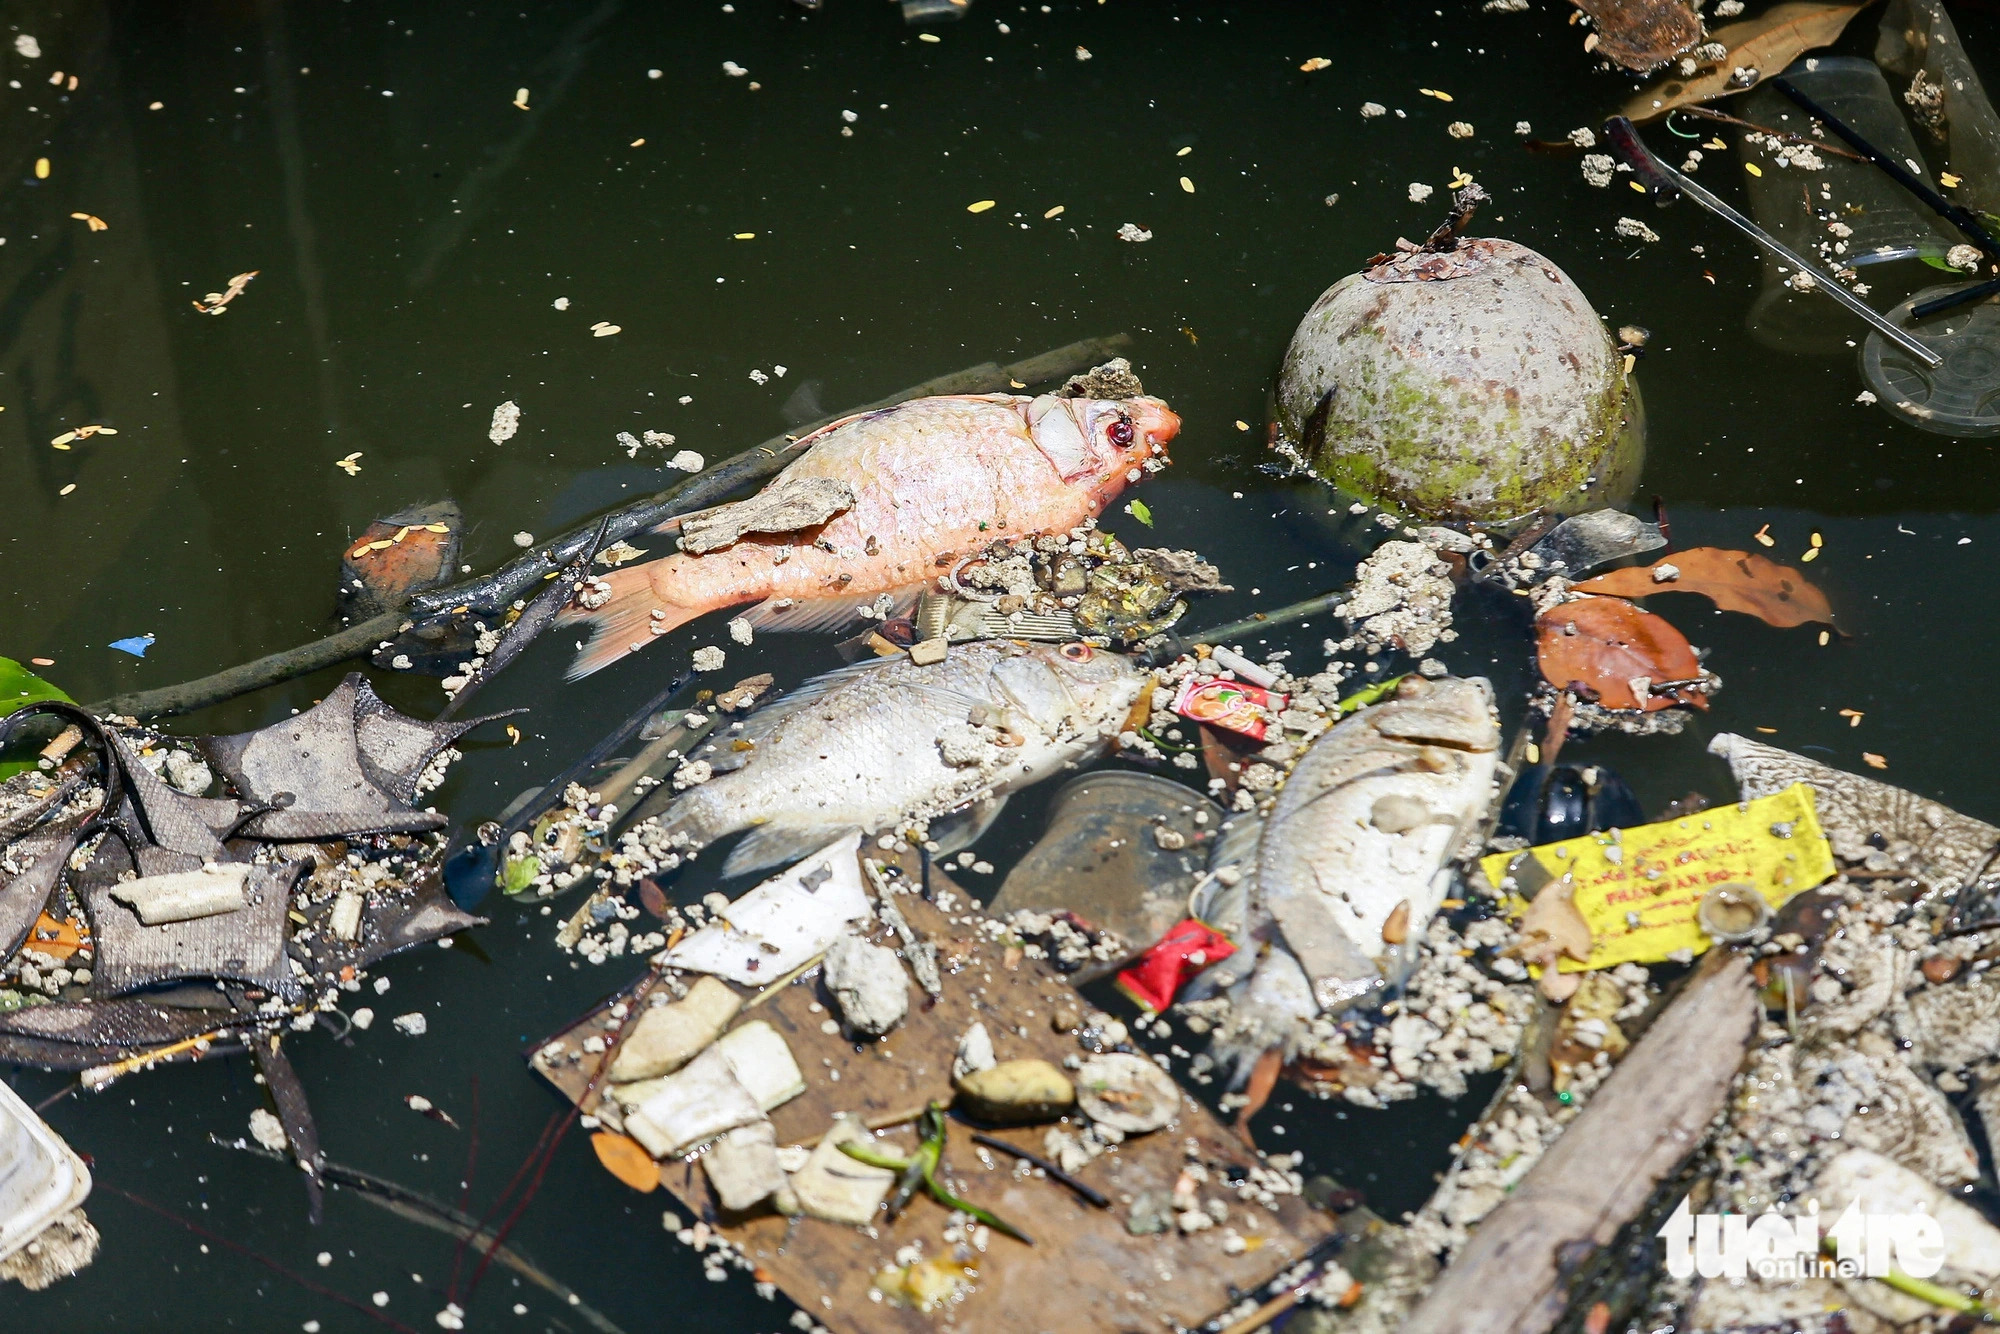 Nhieu Loc-Thi Nghe Canal in Ho Chi Minh City choked with garbage, dead fish